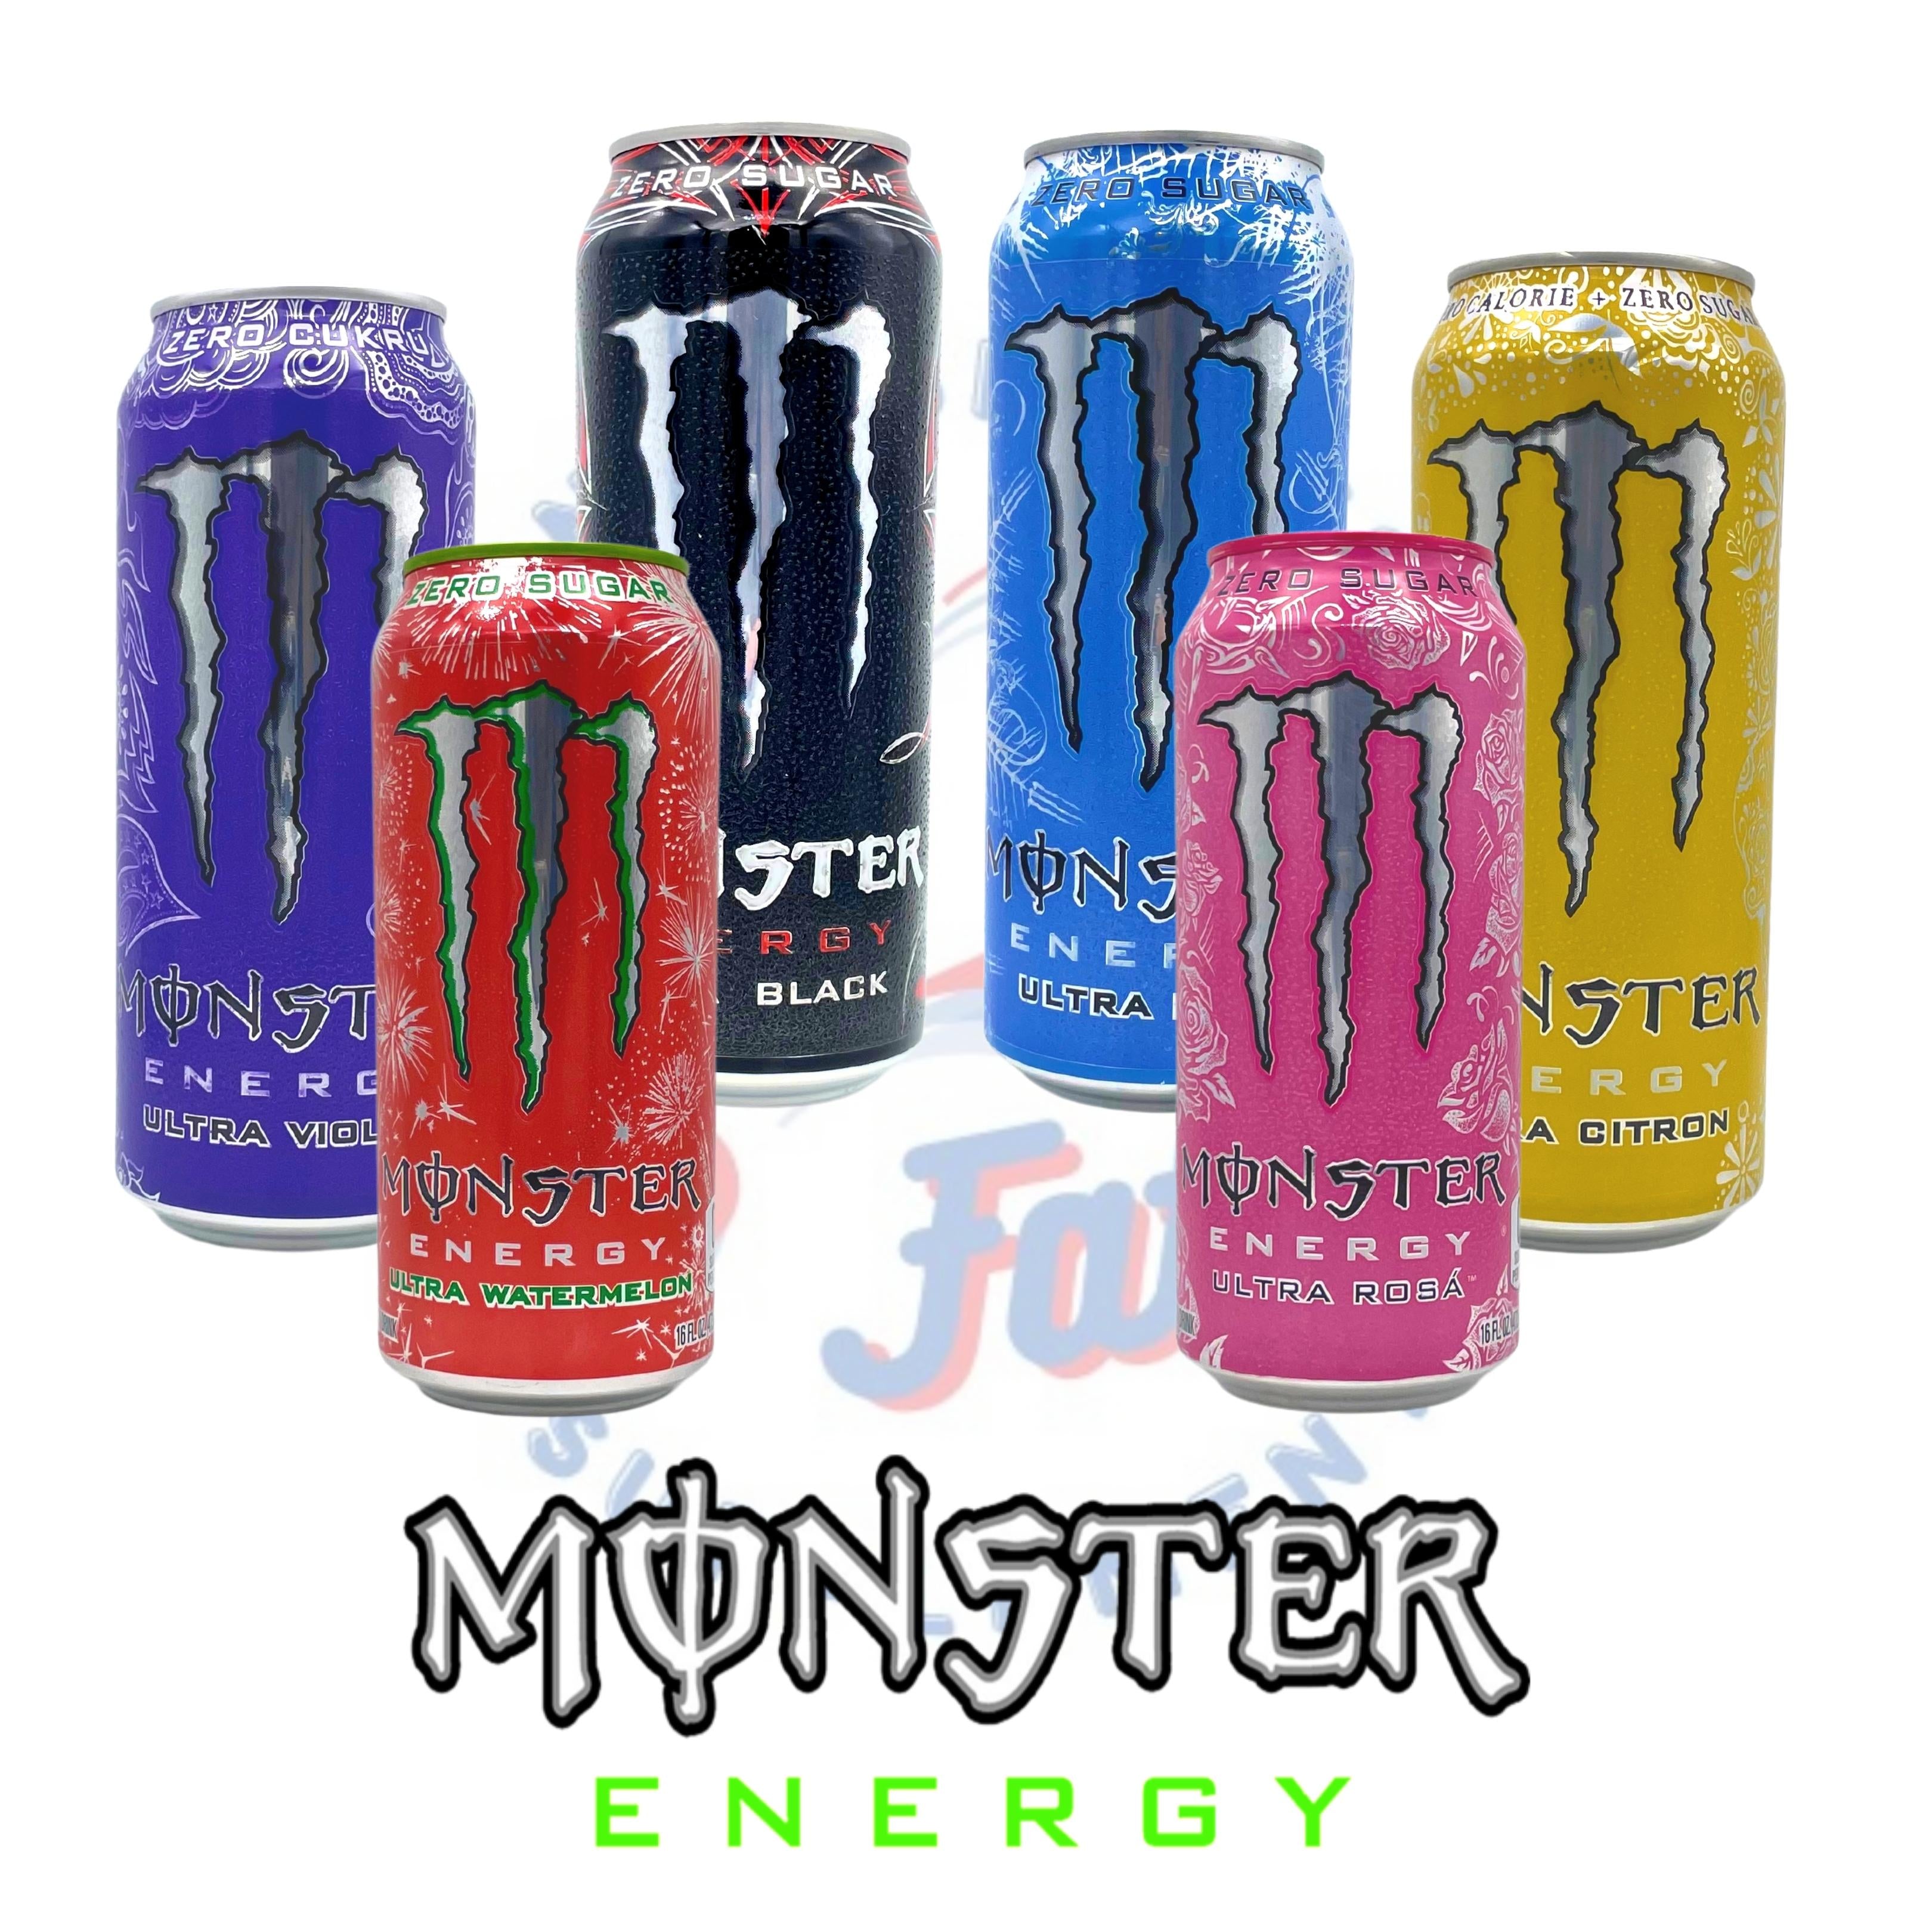 Monster Energy Collection: the ULTRA SPECIAL